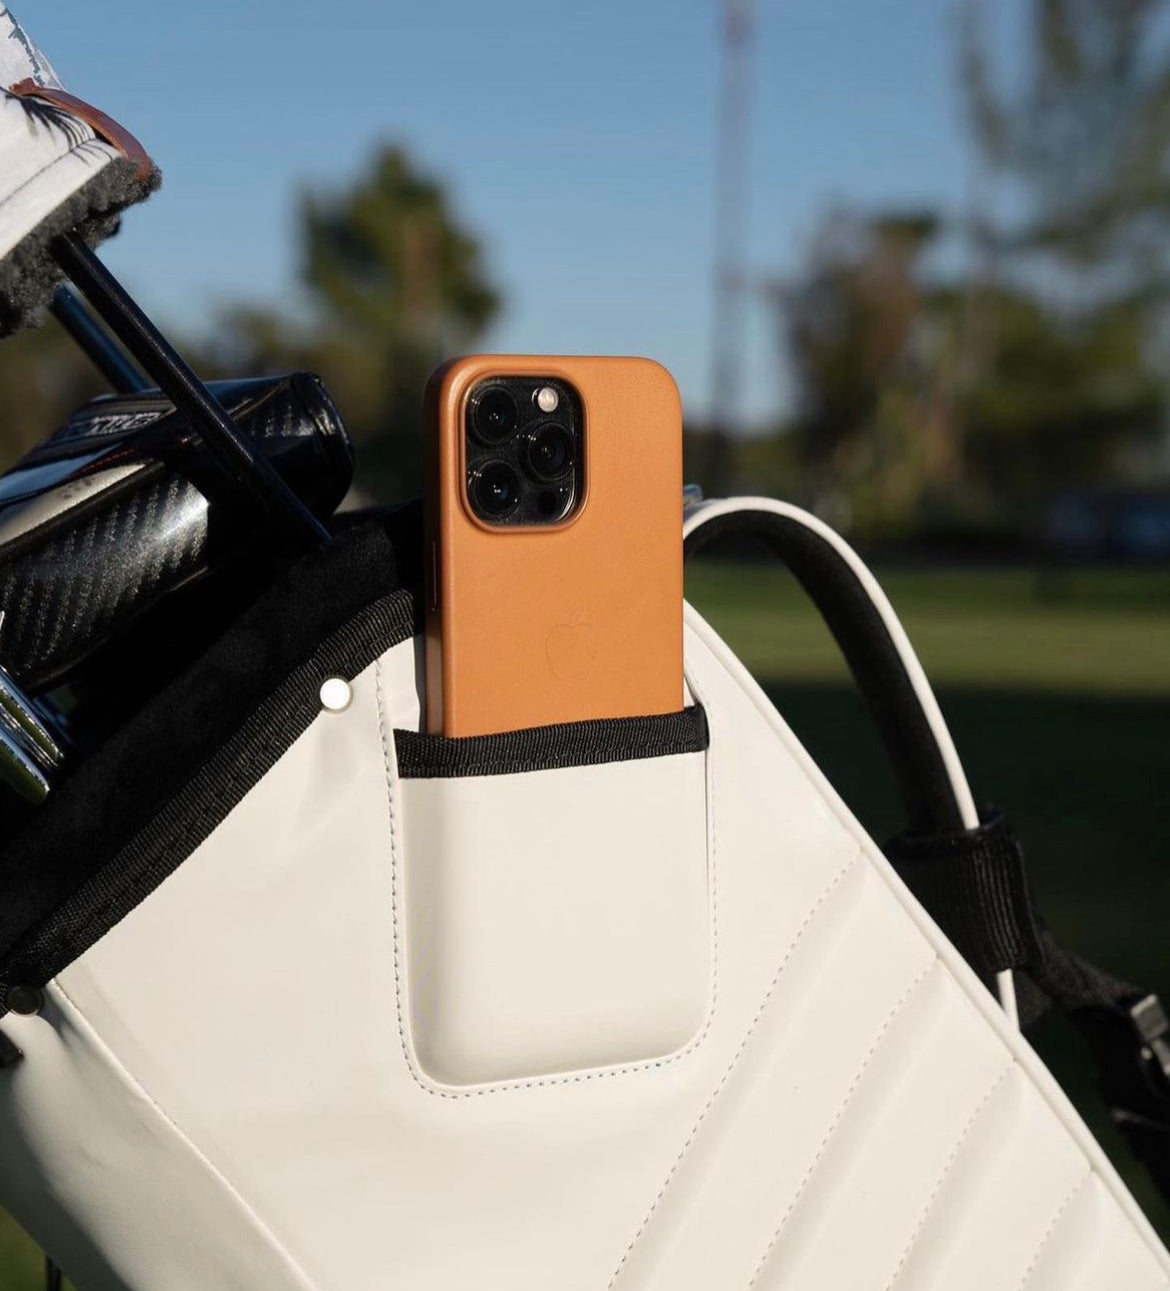 This is the MR1 eco friendly golf bag, featuring our phone filming pocket, compatible with iPhone and Android.